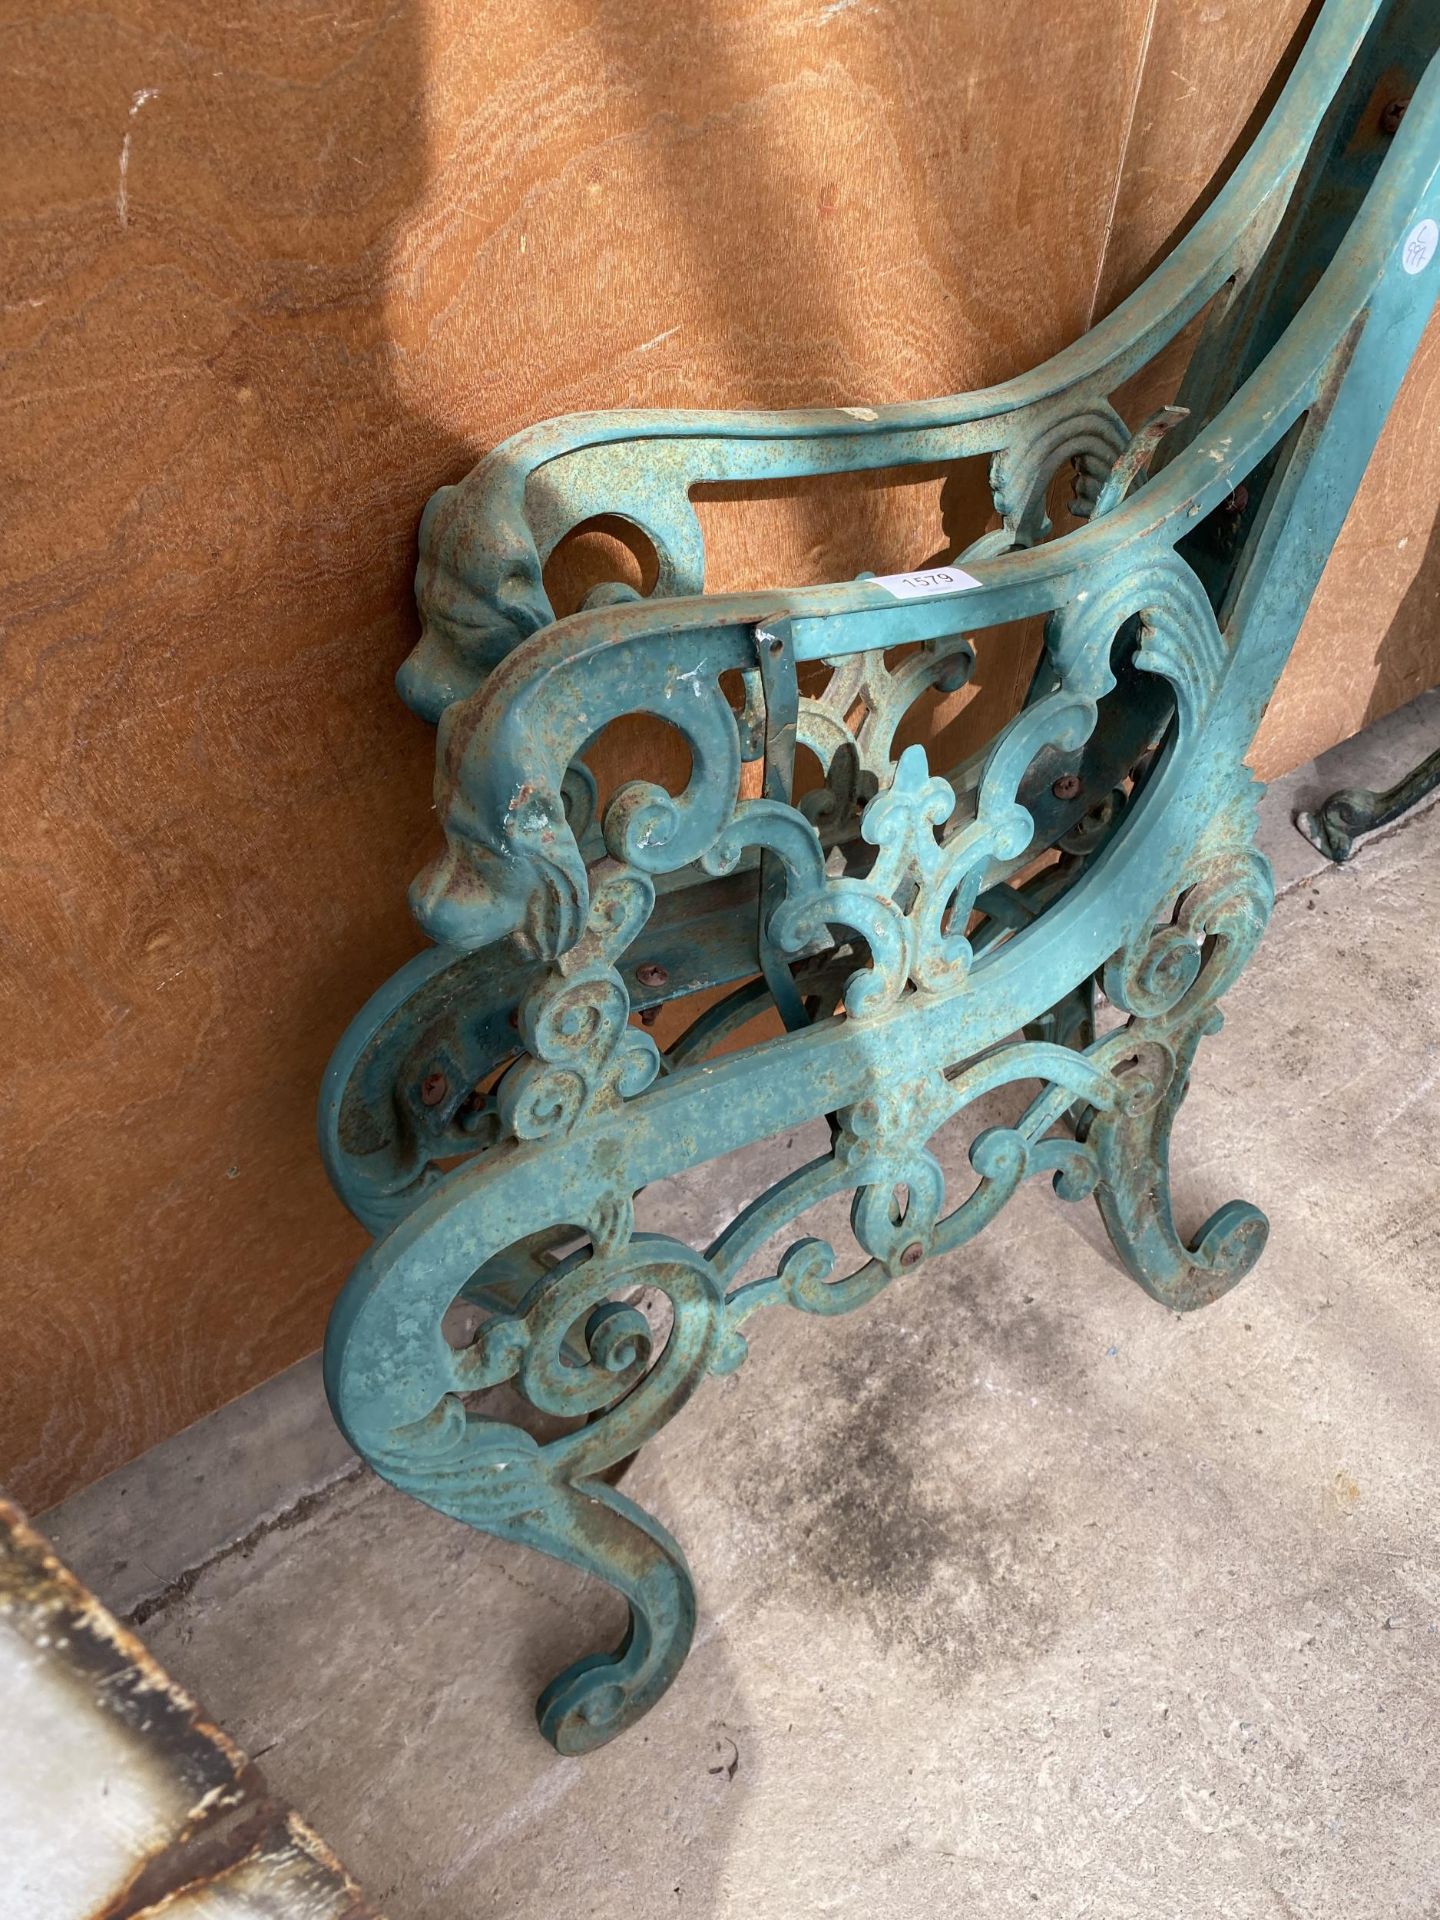 A PAIR OF DECORATIVE CAST IRON BENCH ENDS WITH LION HEAD ENDS - Image 2 of 3